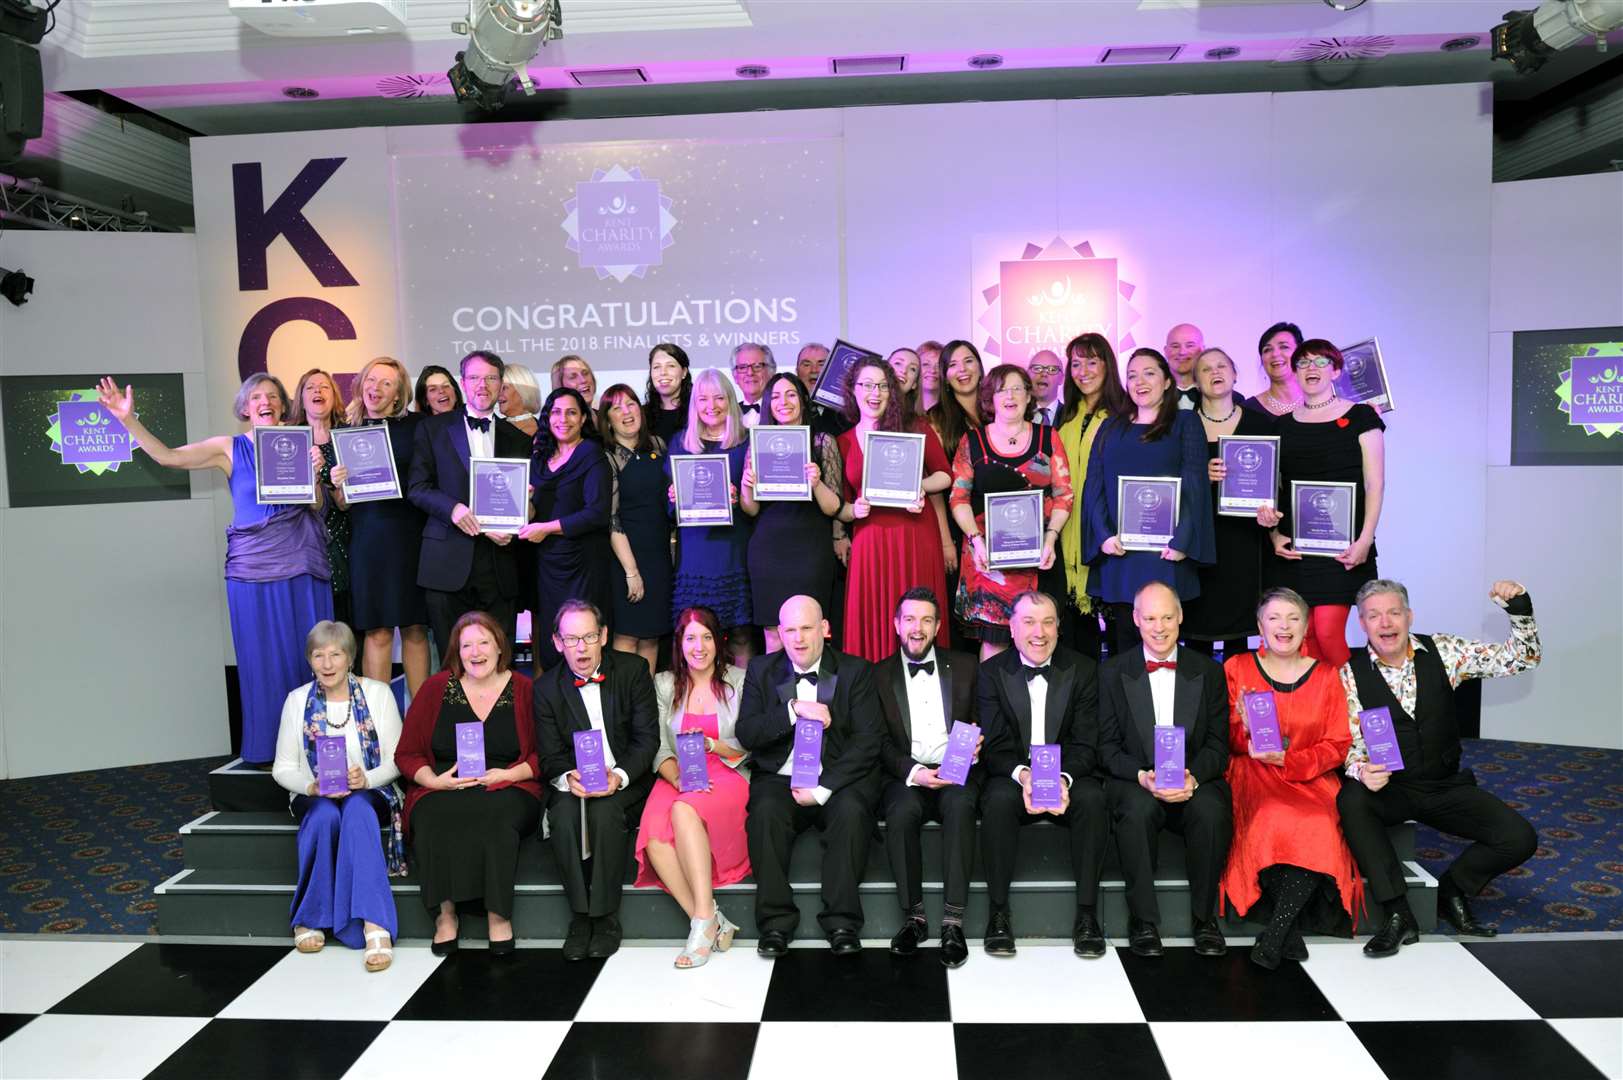 The 2018 Kent Charity Awards finalists